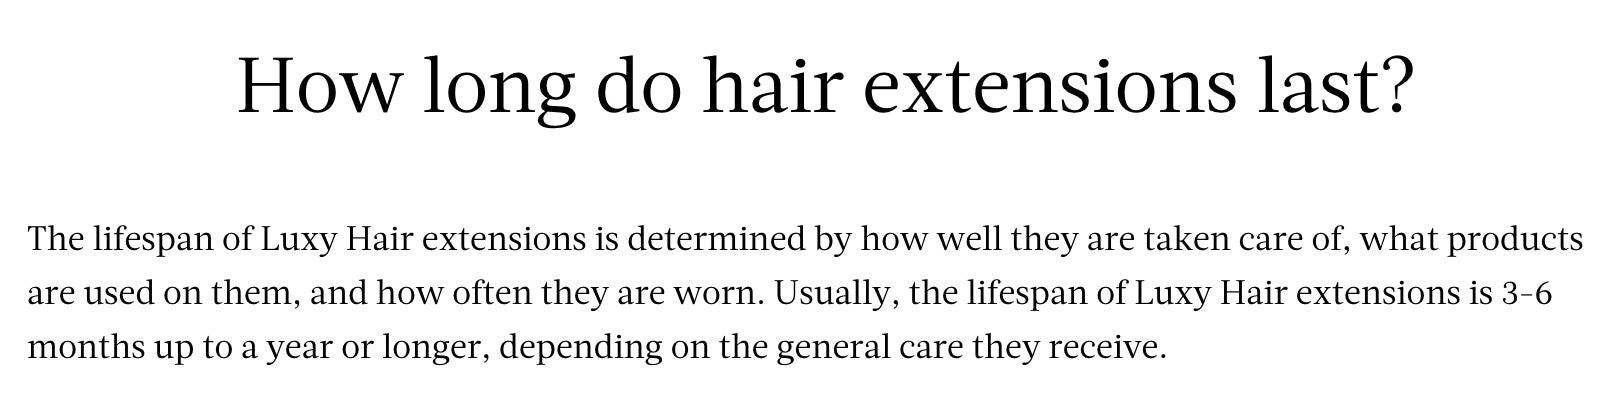 Luxy Hair explaining that its hair extension lasts up to one year.